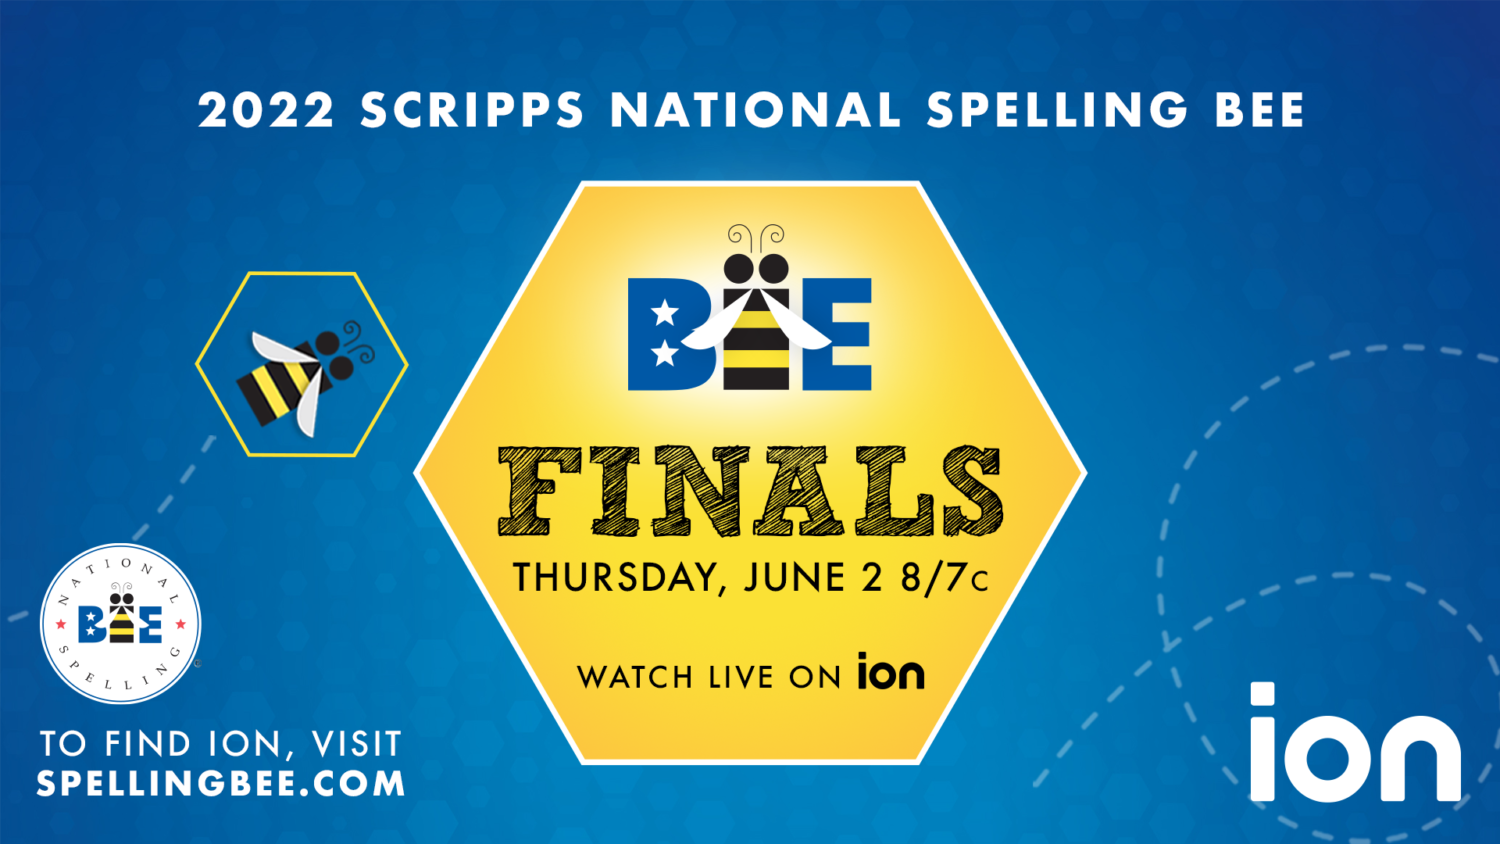 Scripps National Spelling Bee 2022 graphic